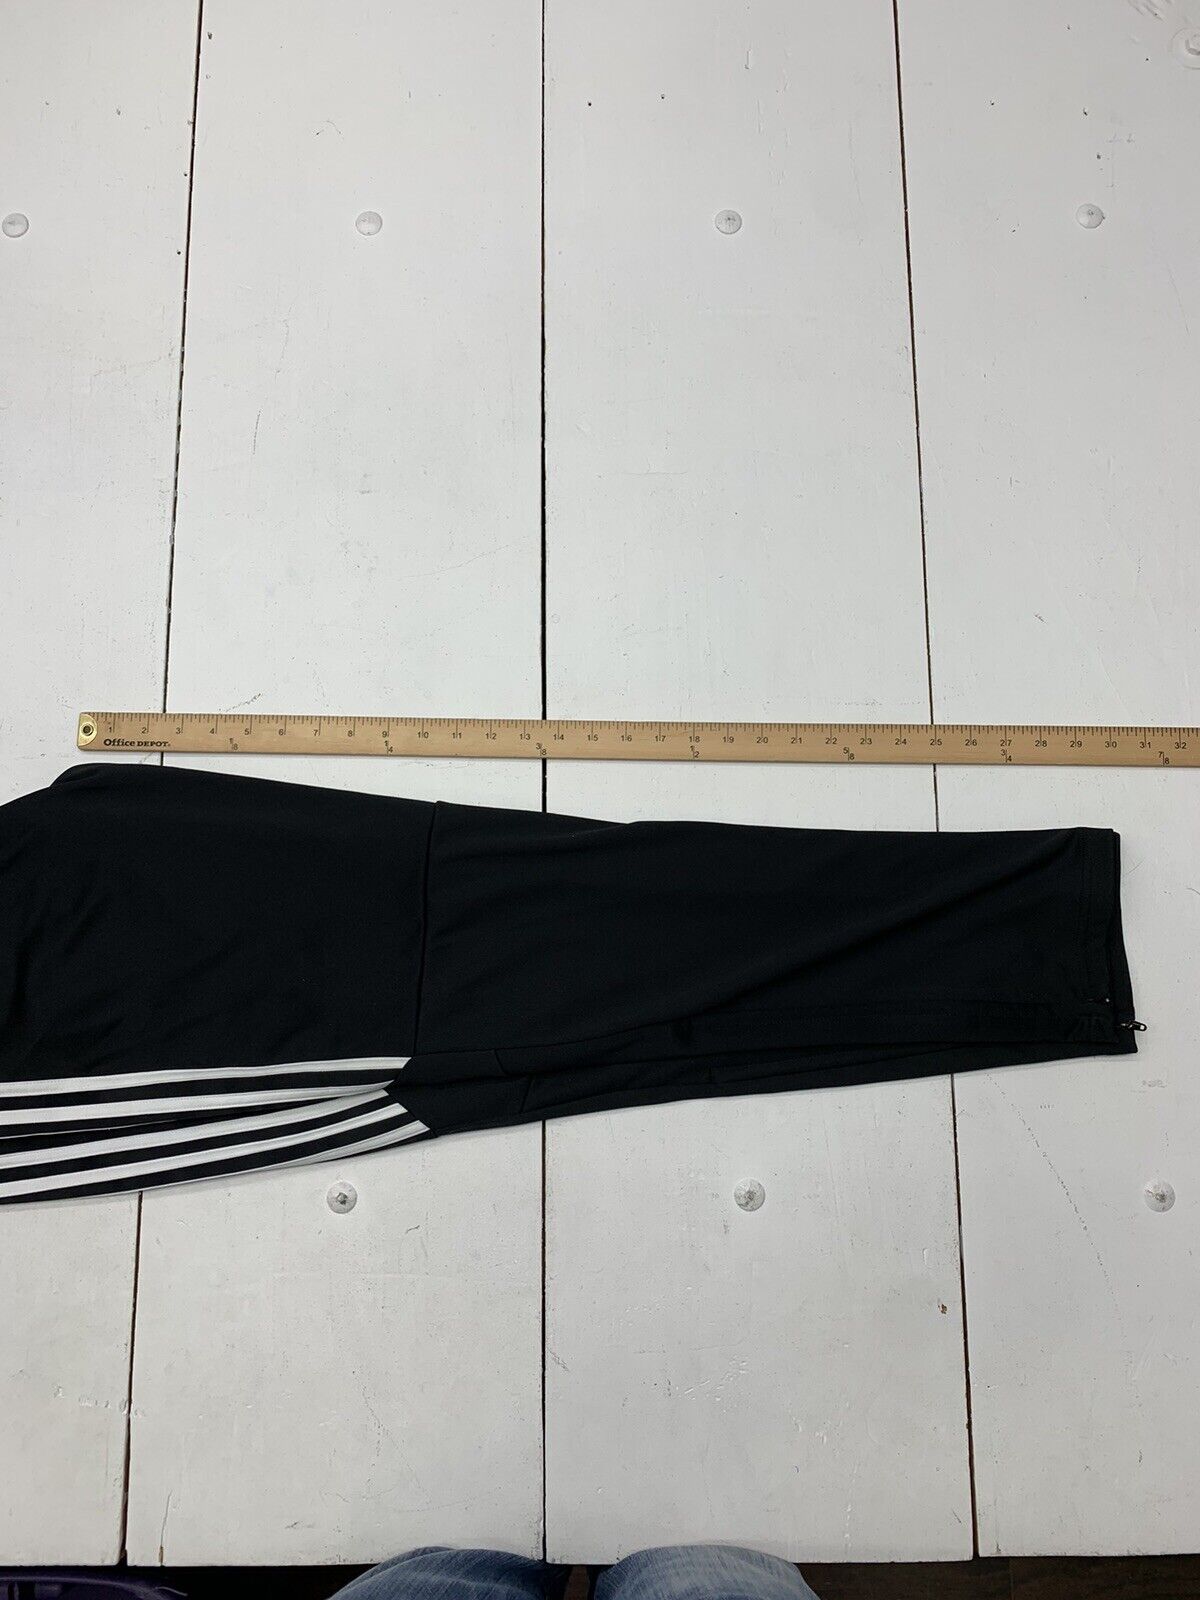 Adidas track pants, zip ankle cuffs | Adidas track pants, Clothes design,  Ankle cuffs